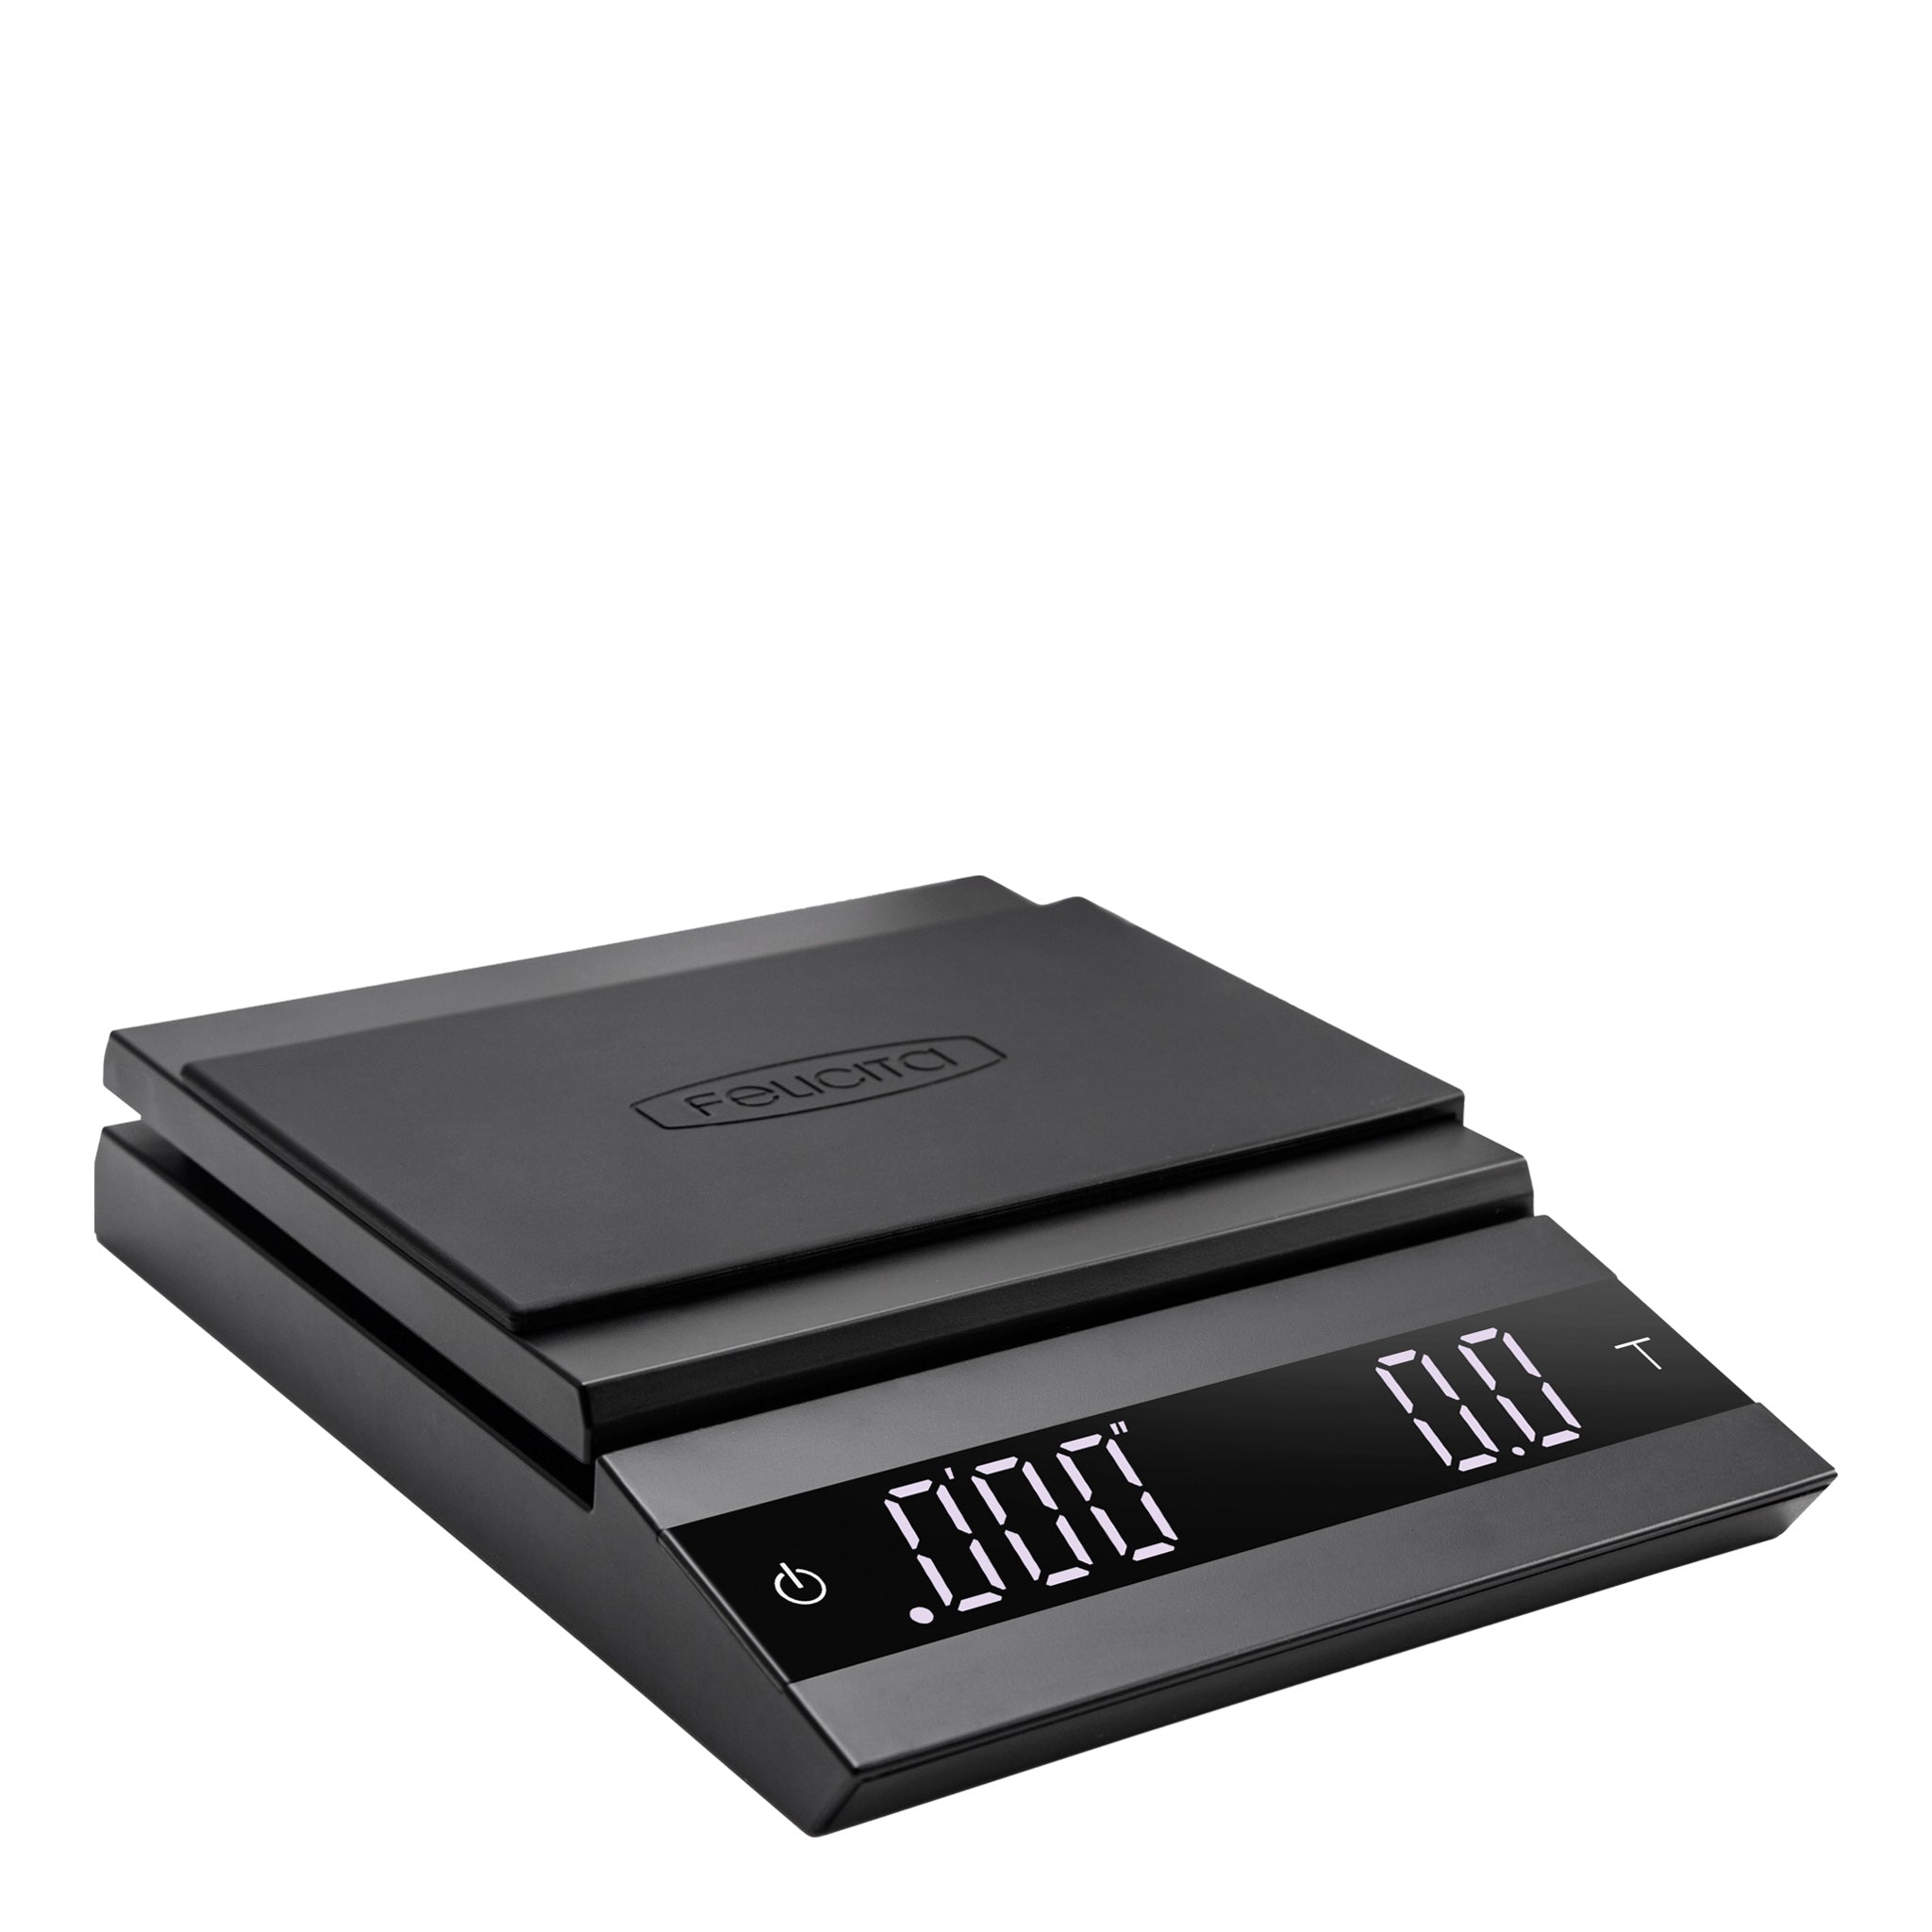 Felicita Parallel Coffee, Coffee Scale Bluetooth